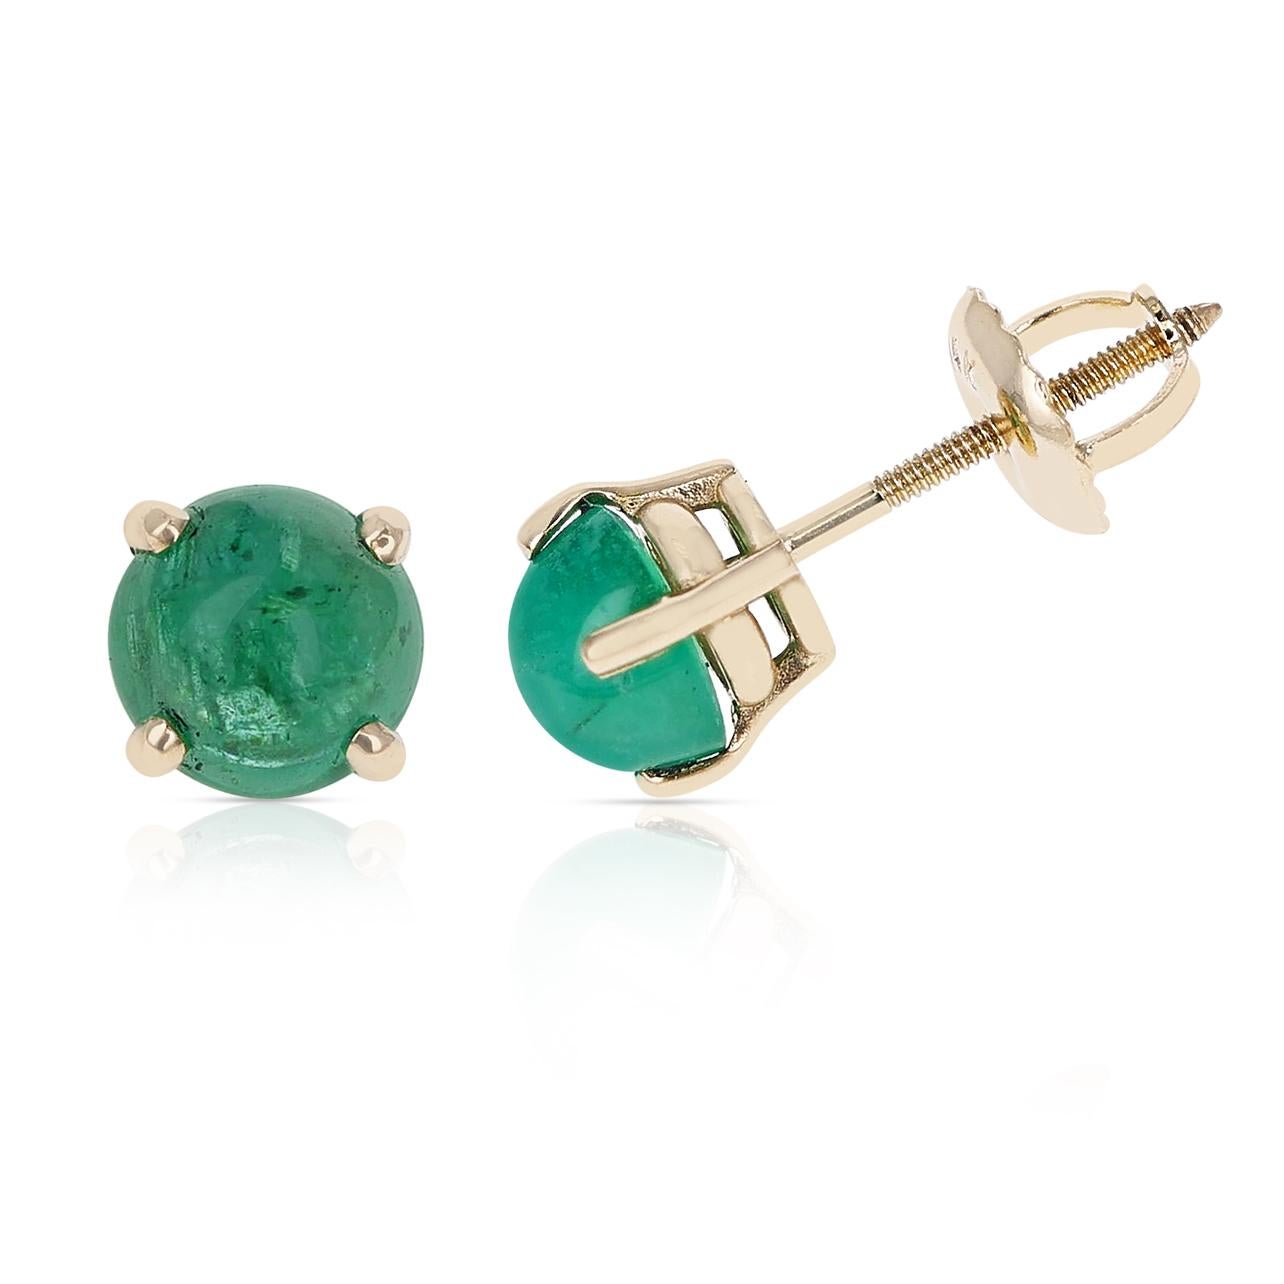 Round Cut Emerald Round Cabochon Stud Earrings Made in 14 Karat Yellow Gold